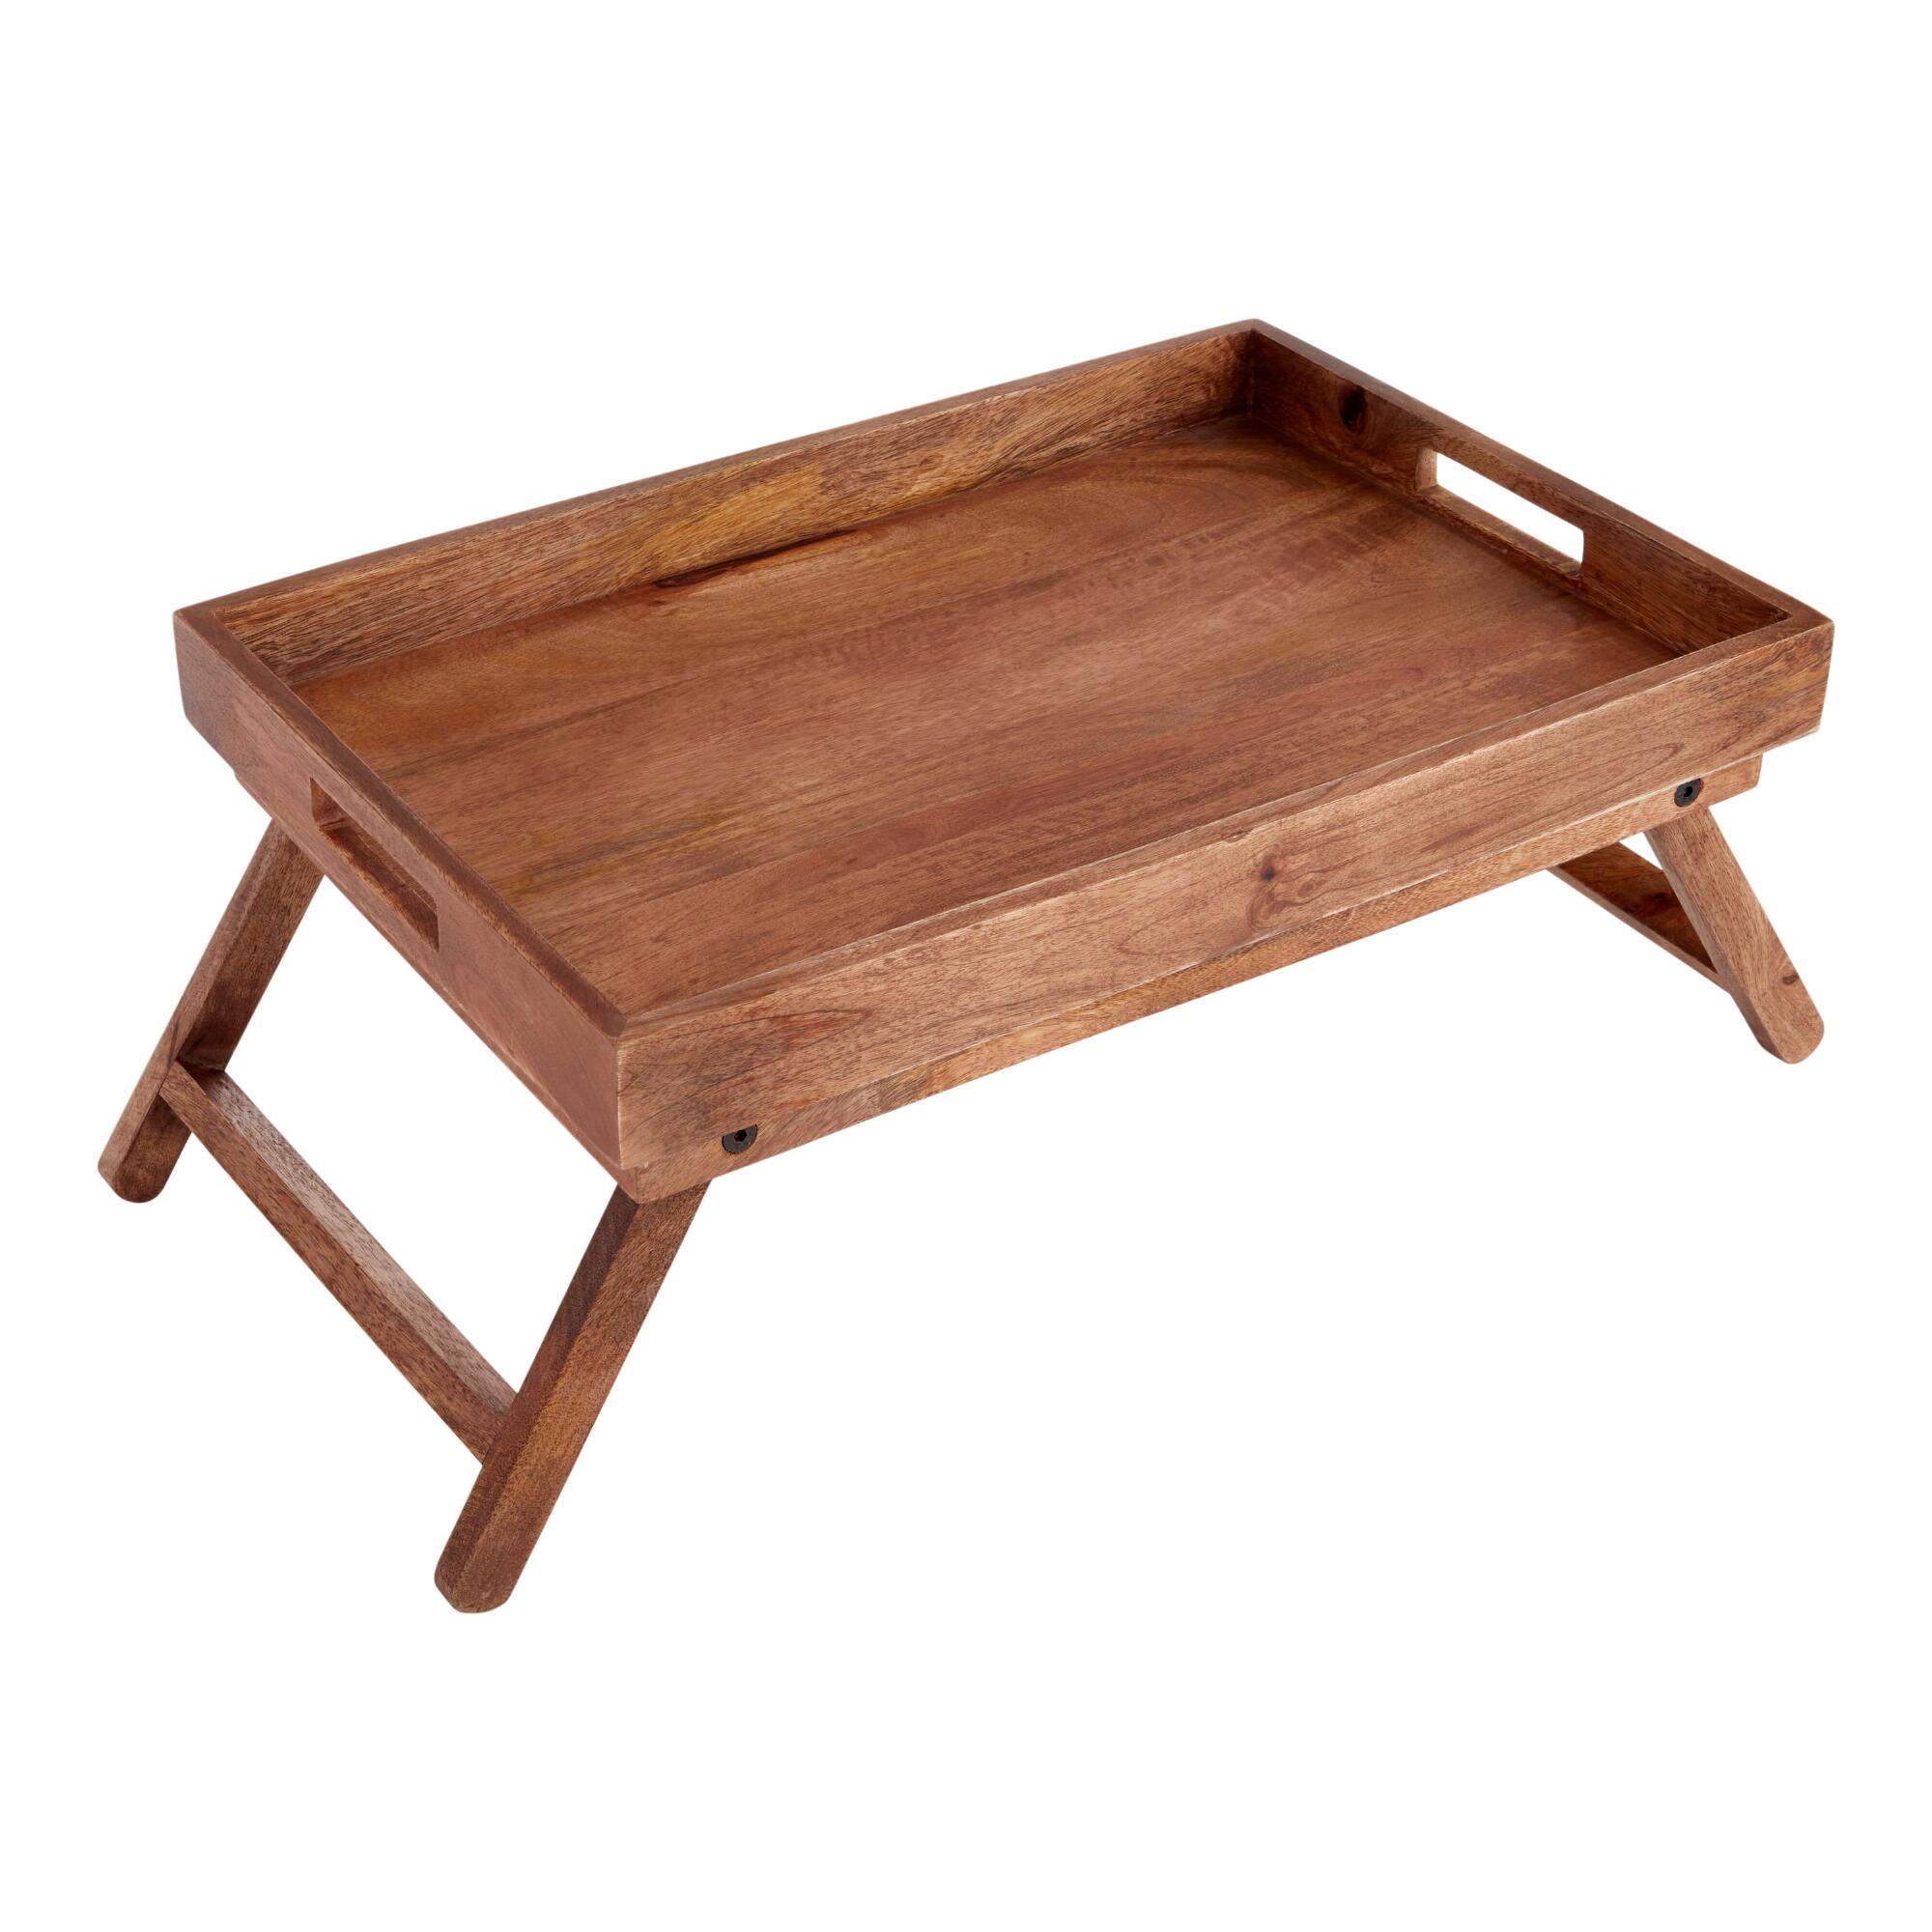 Natural Wood Bed Serving Tray with Folding Legs by World Market